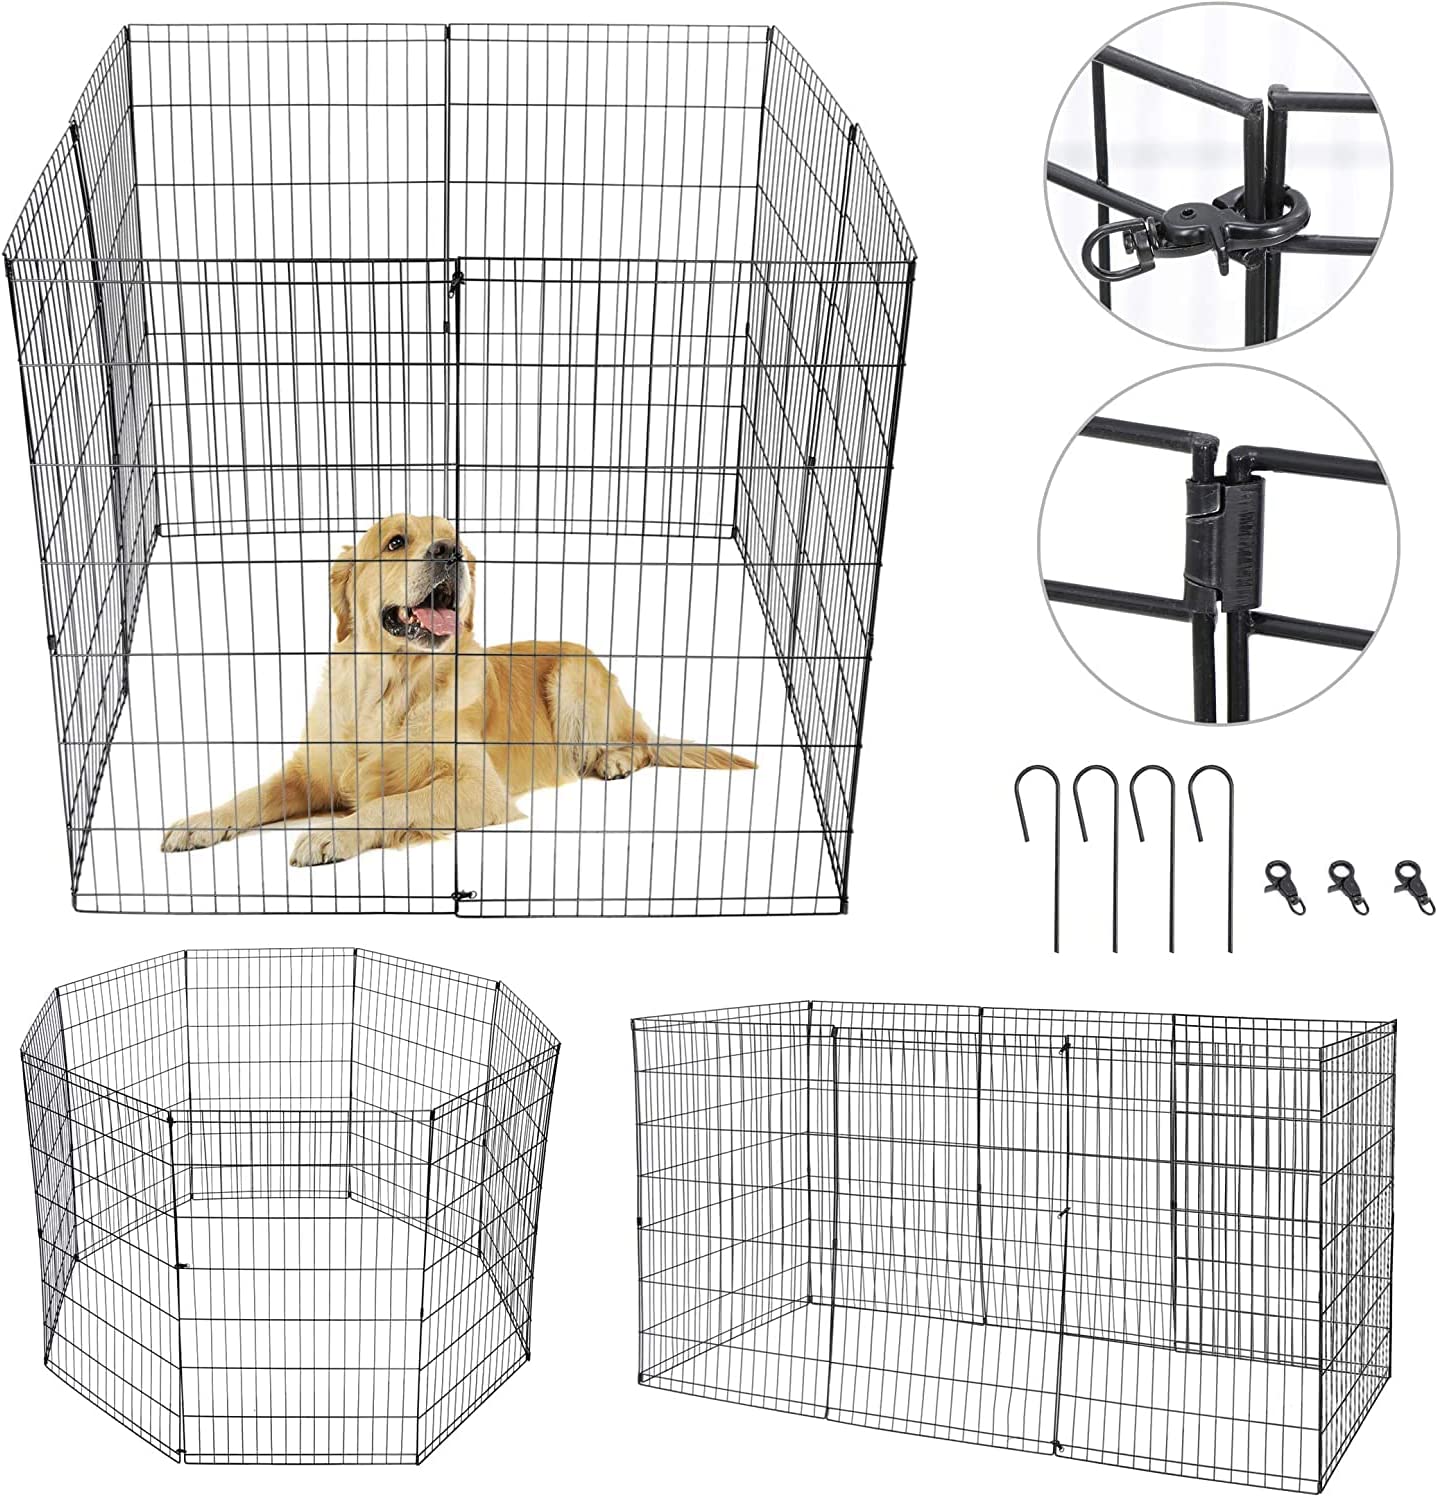 Puppy Pet Playpen 8 Panel Indoor Outdoor Metal Portable Folding Animal Exercise Dog Fence